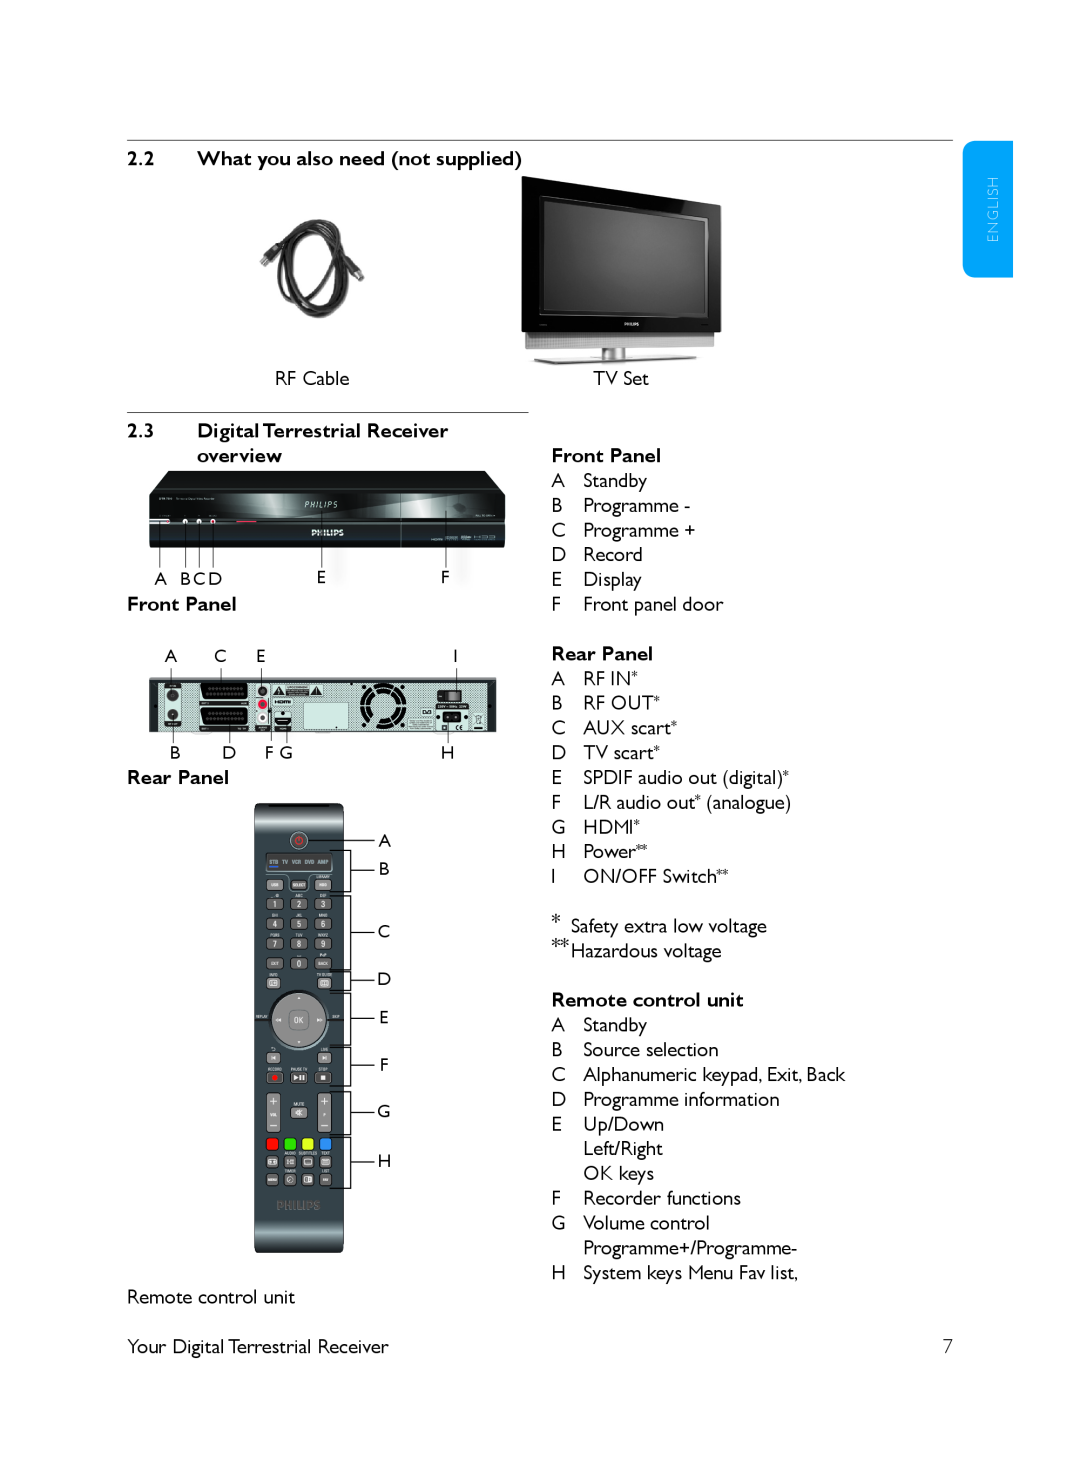 Philips DTR 7510 2.2What you also need not supplied, 2.3Digital Terrestrial Receiver overview, Front Panel, Rear Panel 